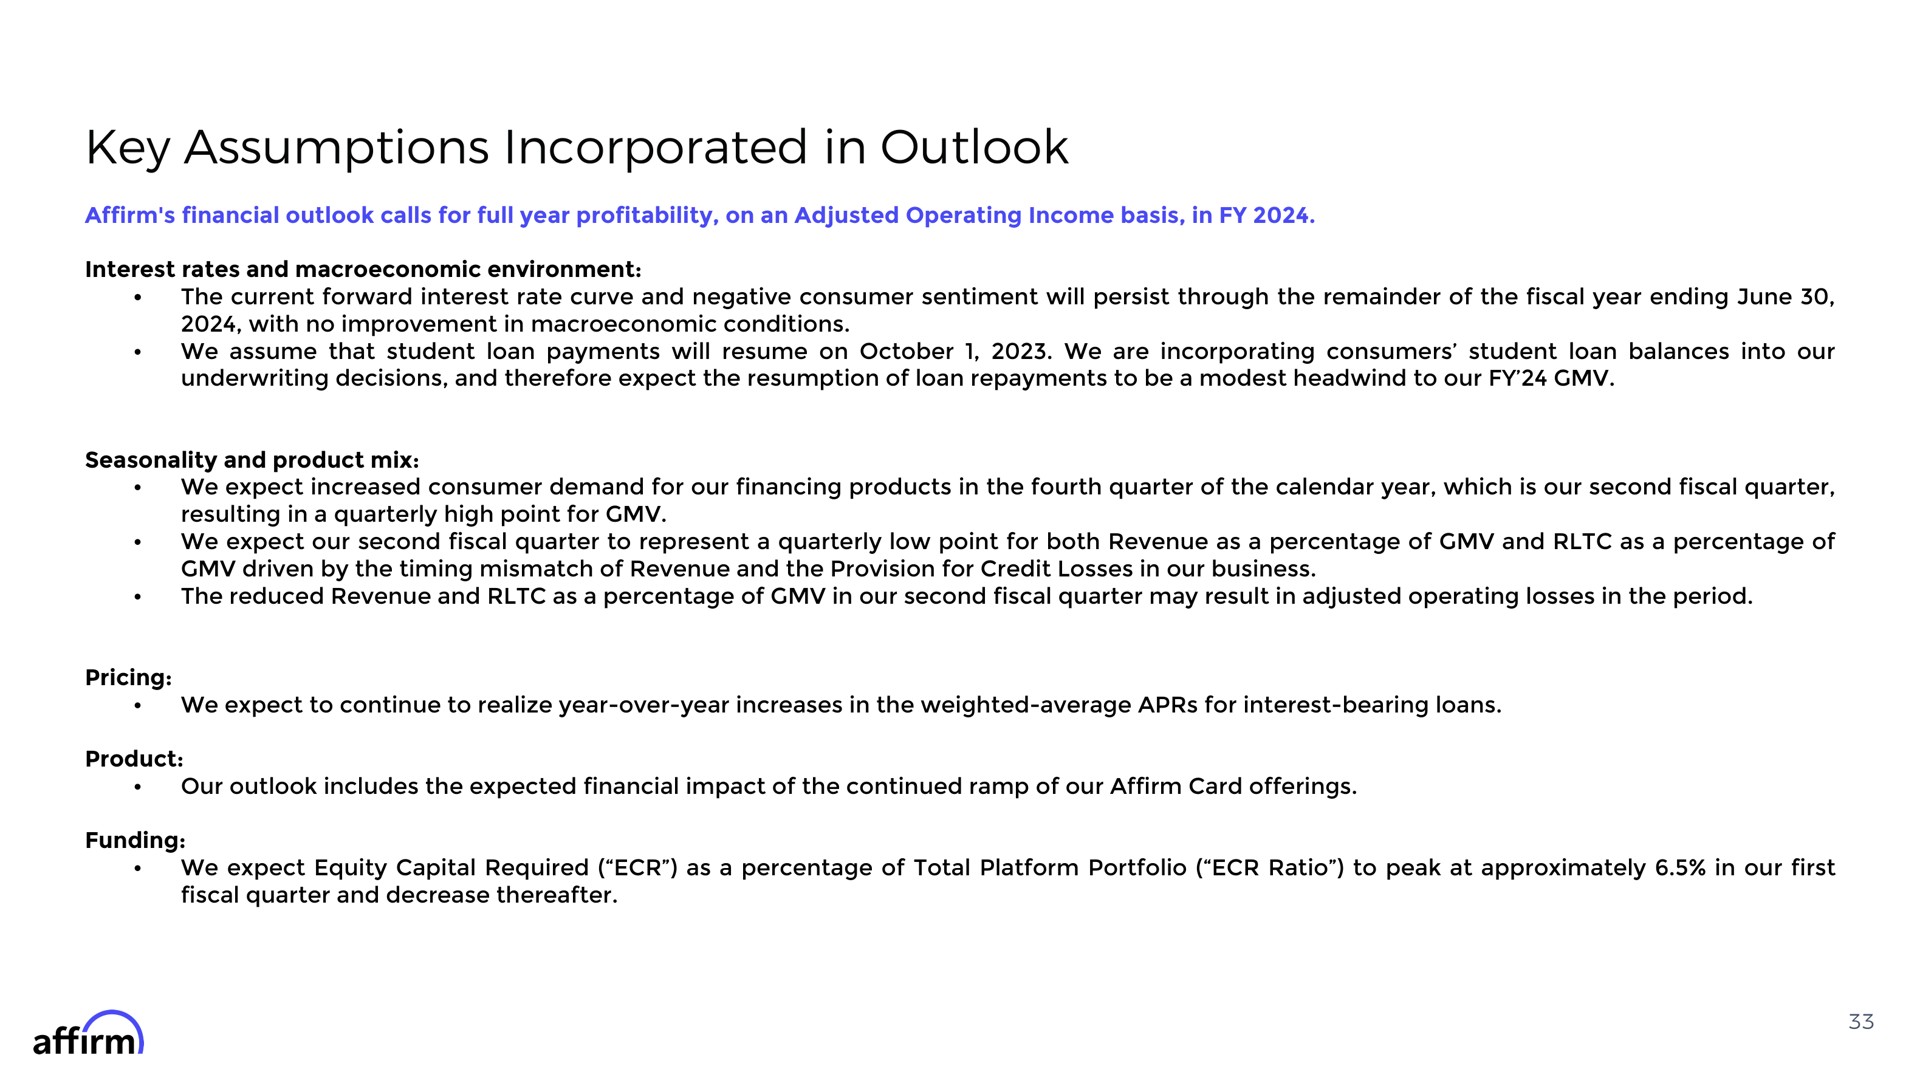 key assumptions incorporated in outlook affirm | Affirm